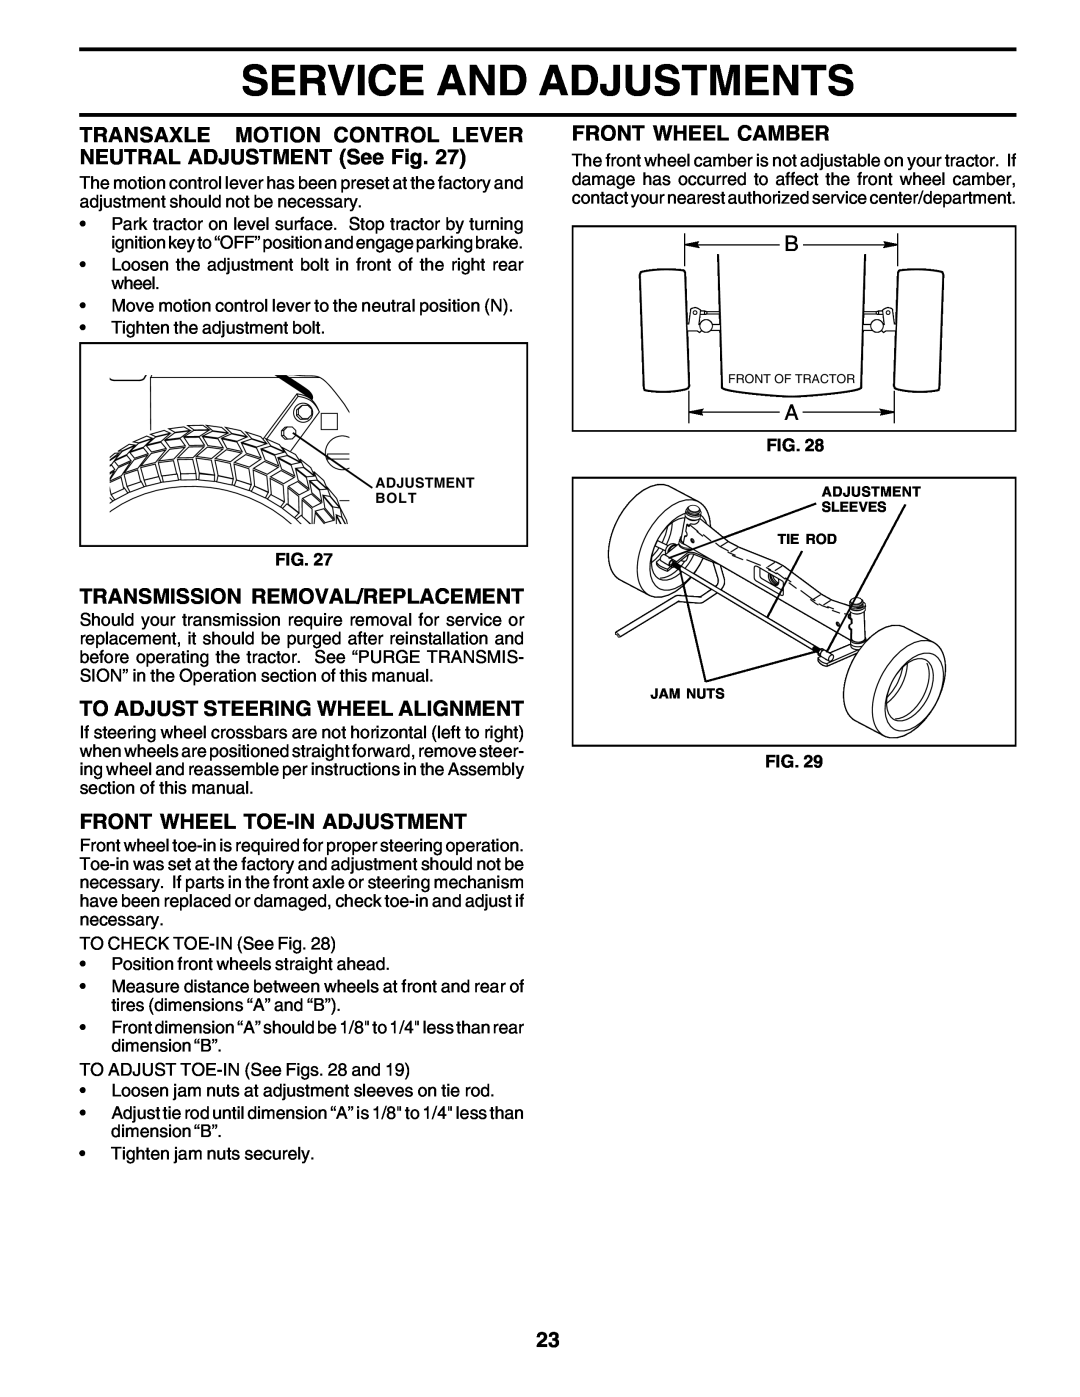 Poulan 177937 Service And Adjustments, TRANSAXLE MOTION CONTROL LEVER NEUTRAL ADJUSTMENT See Fig, Front Wheel Camber 